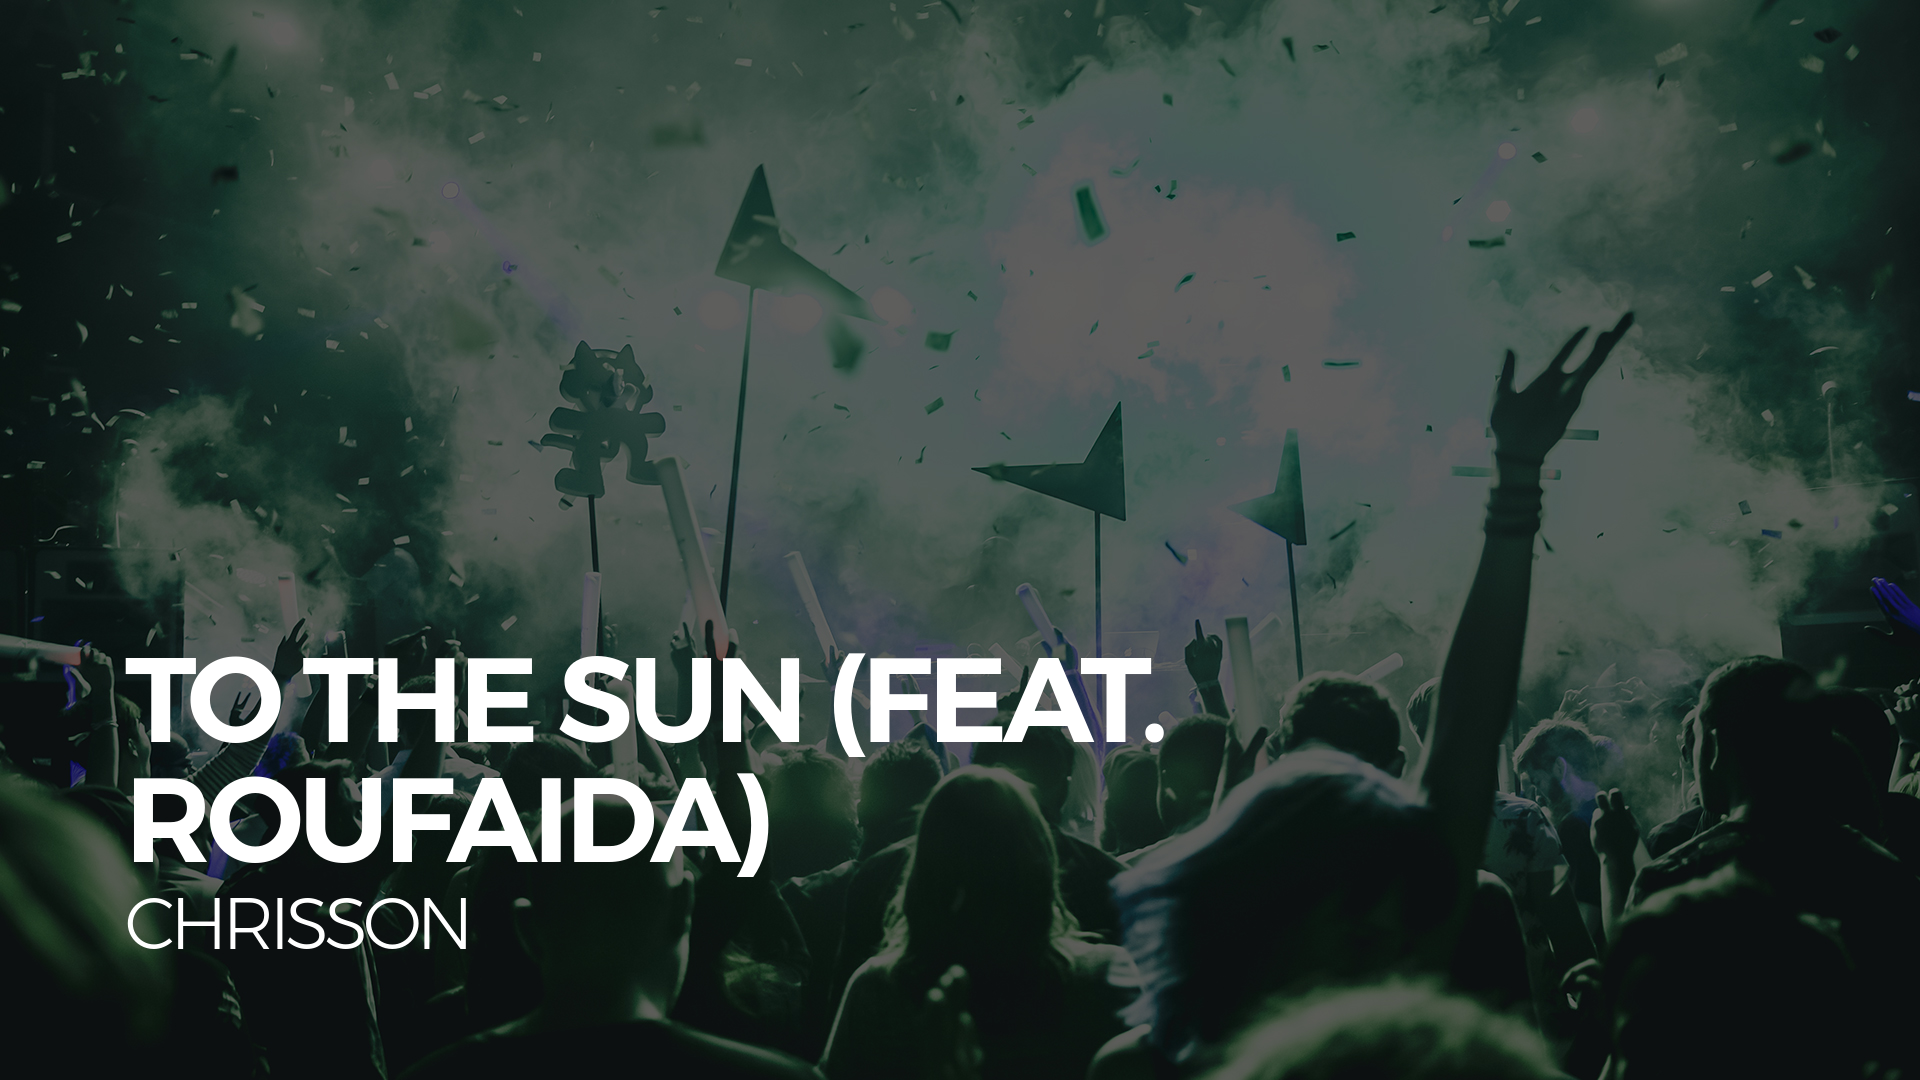 [DnB] - Hot Date! & Chrisson - To The Sun (Feat. Roufaida) [Monstercat Release]